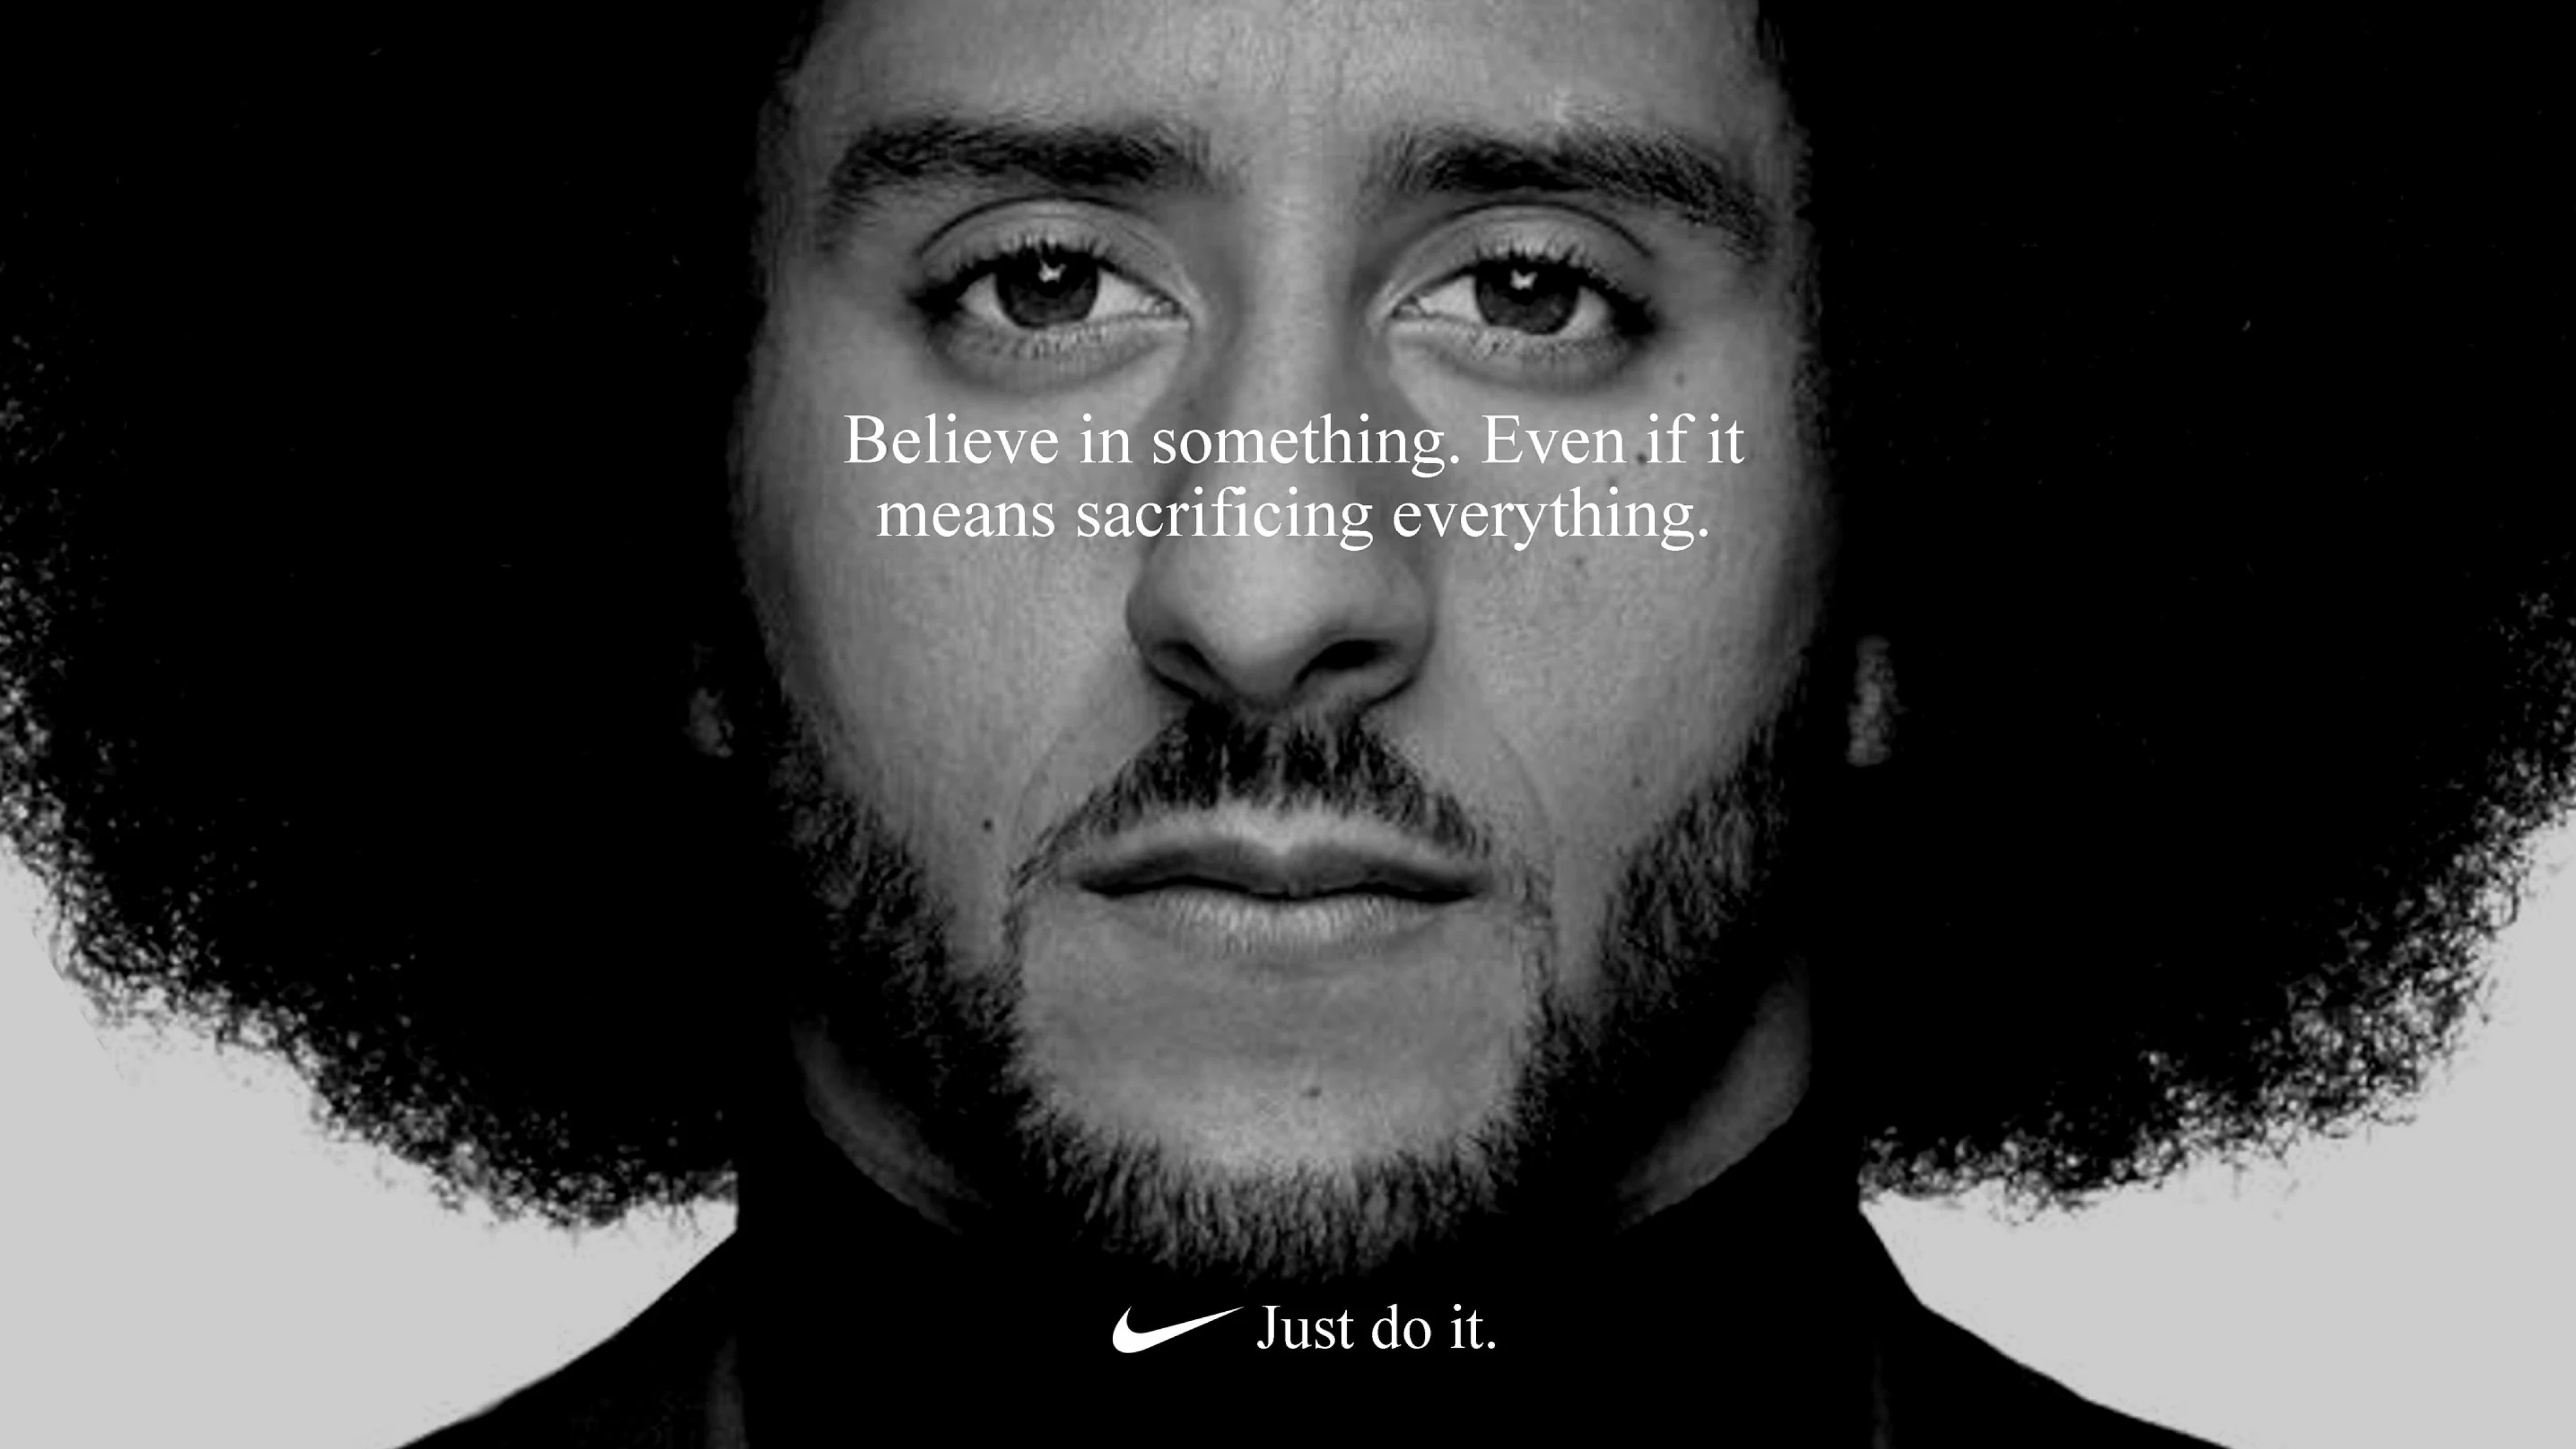 nike soccer ads just do it